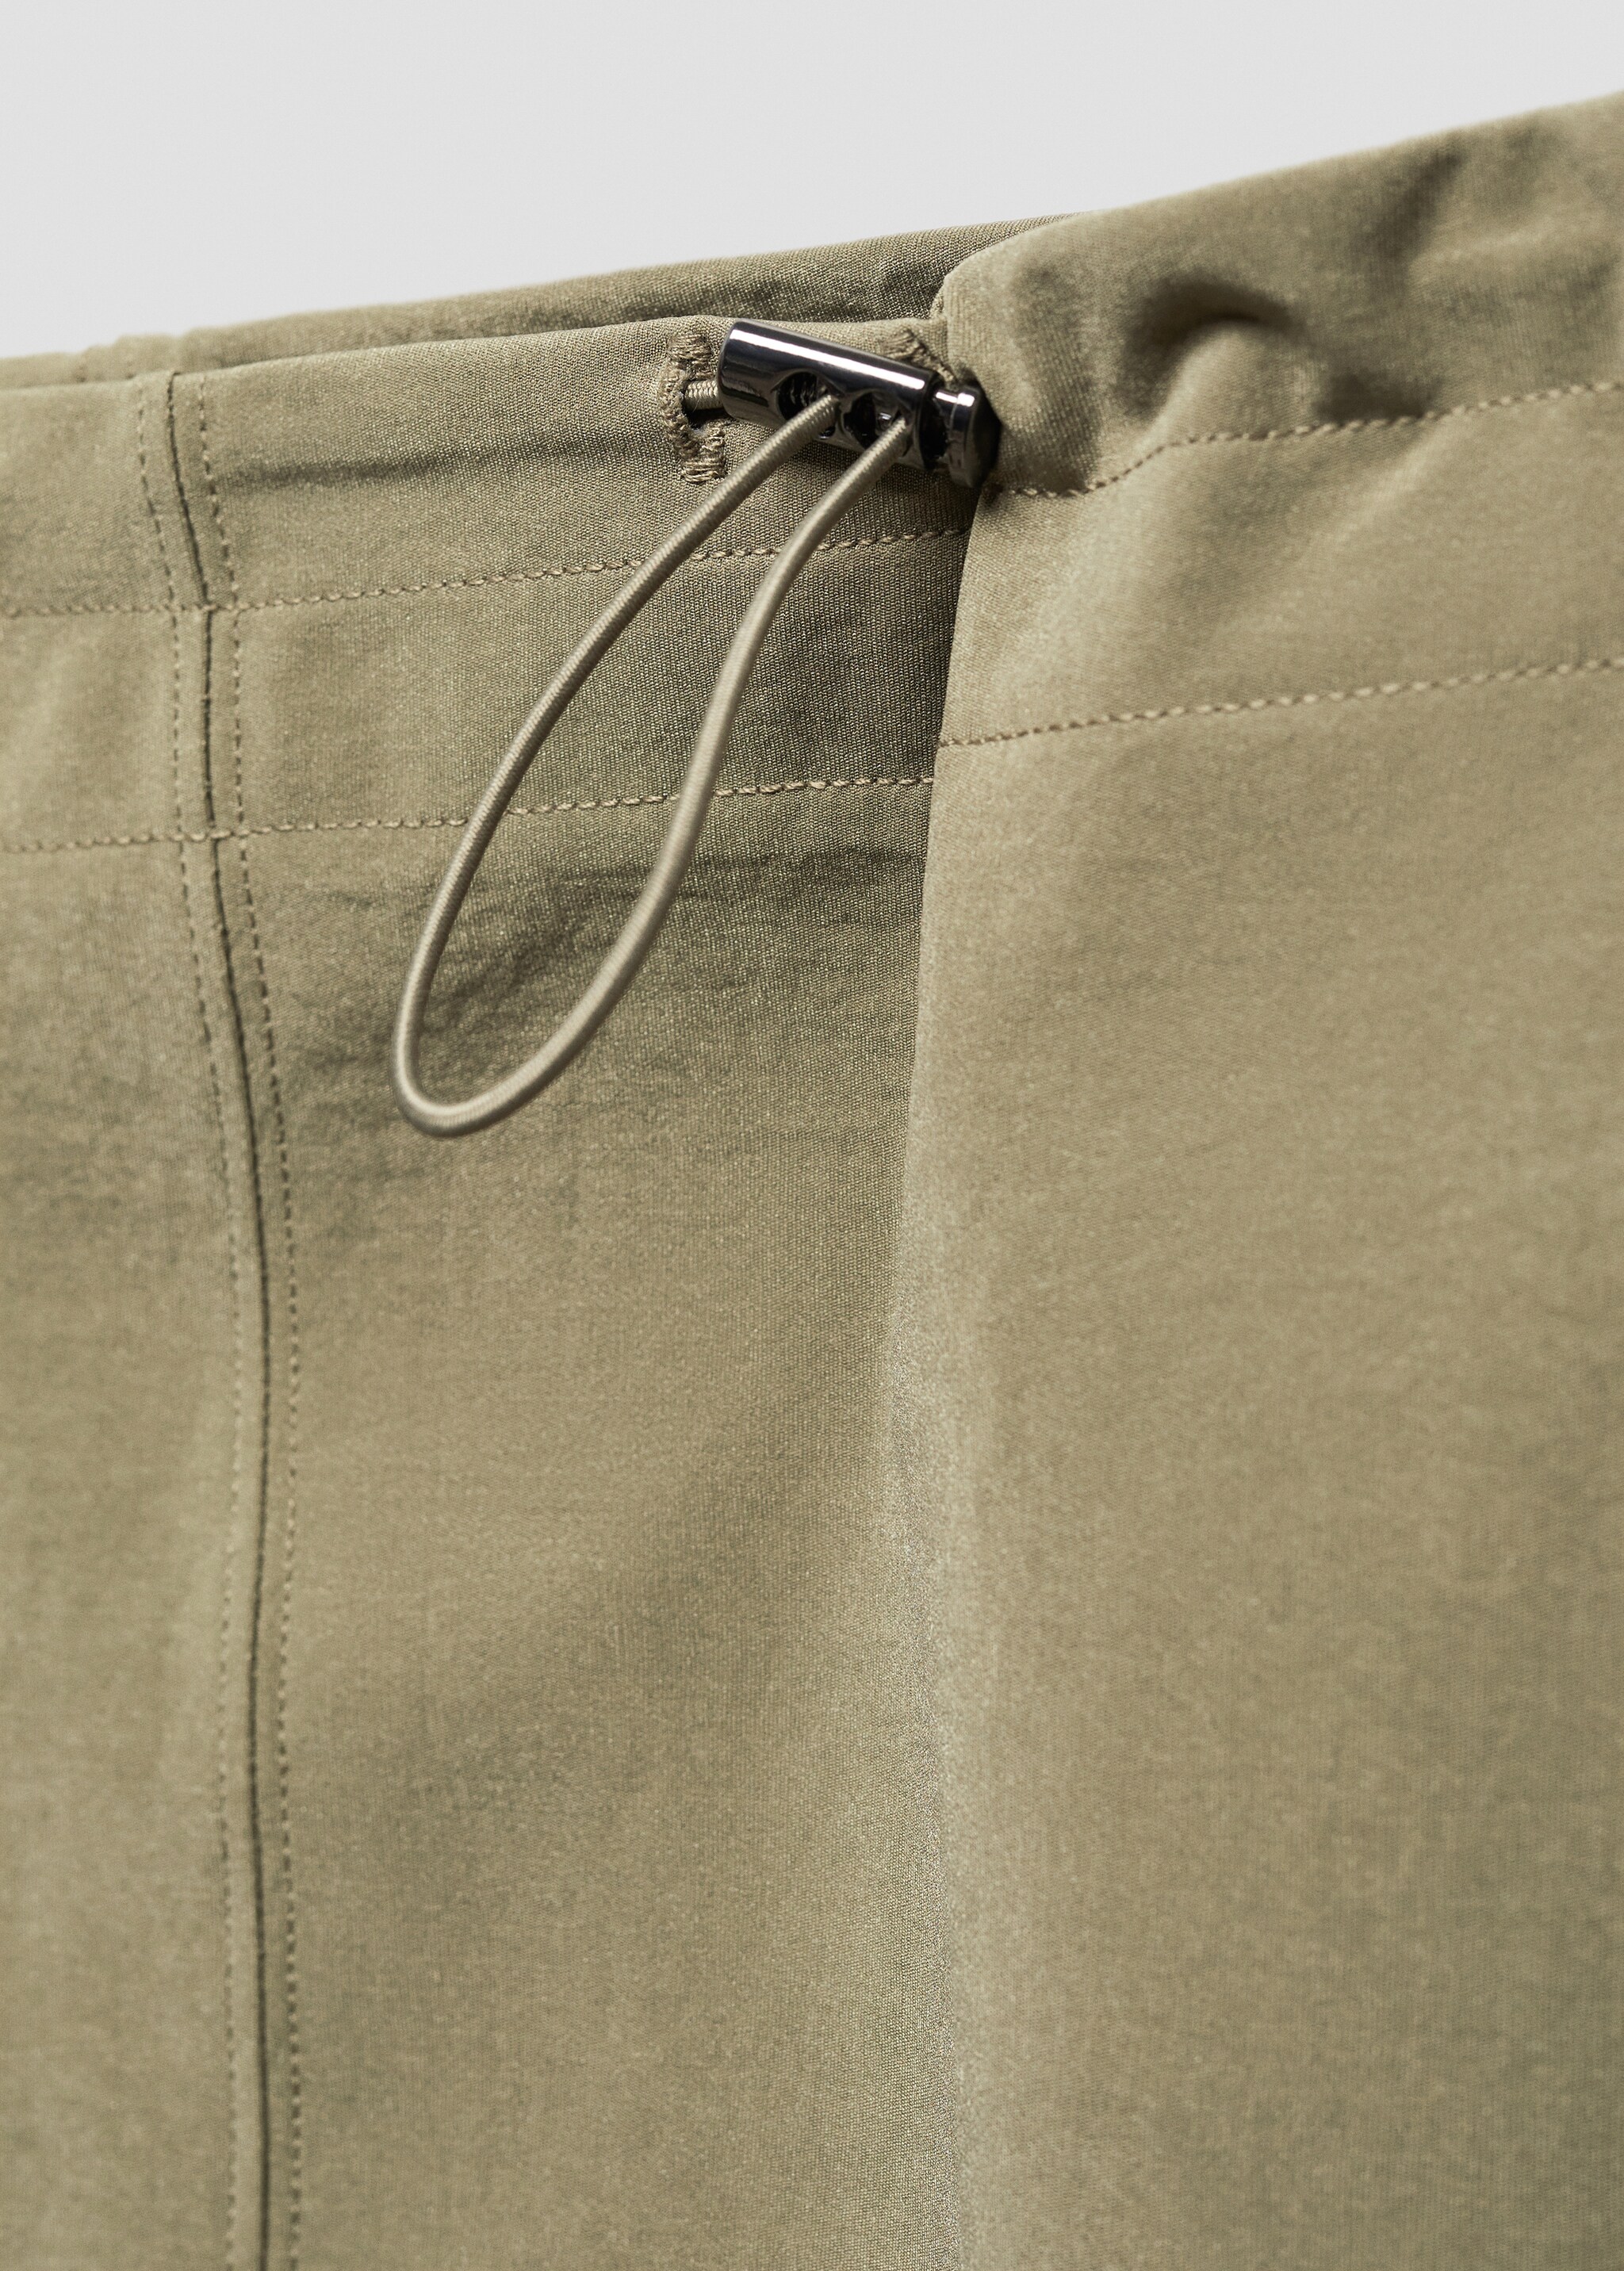 Midi skirt cargo pockets - Details of the article 8